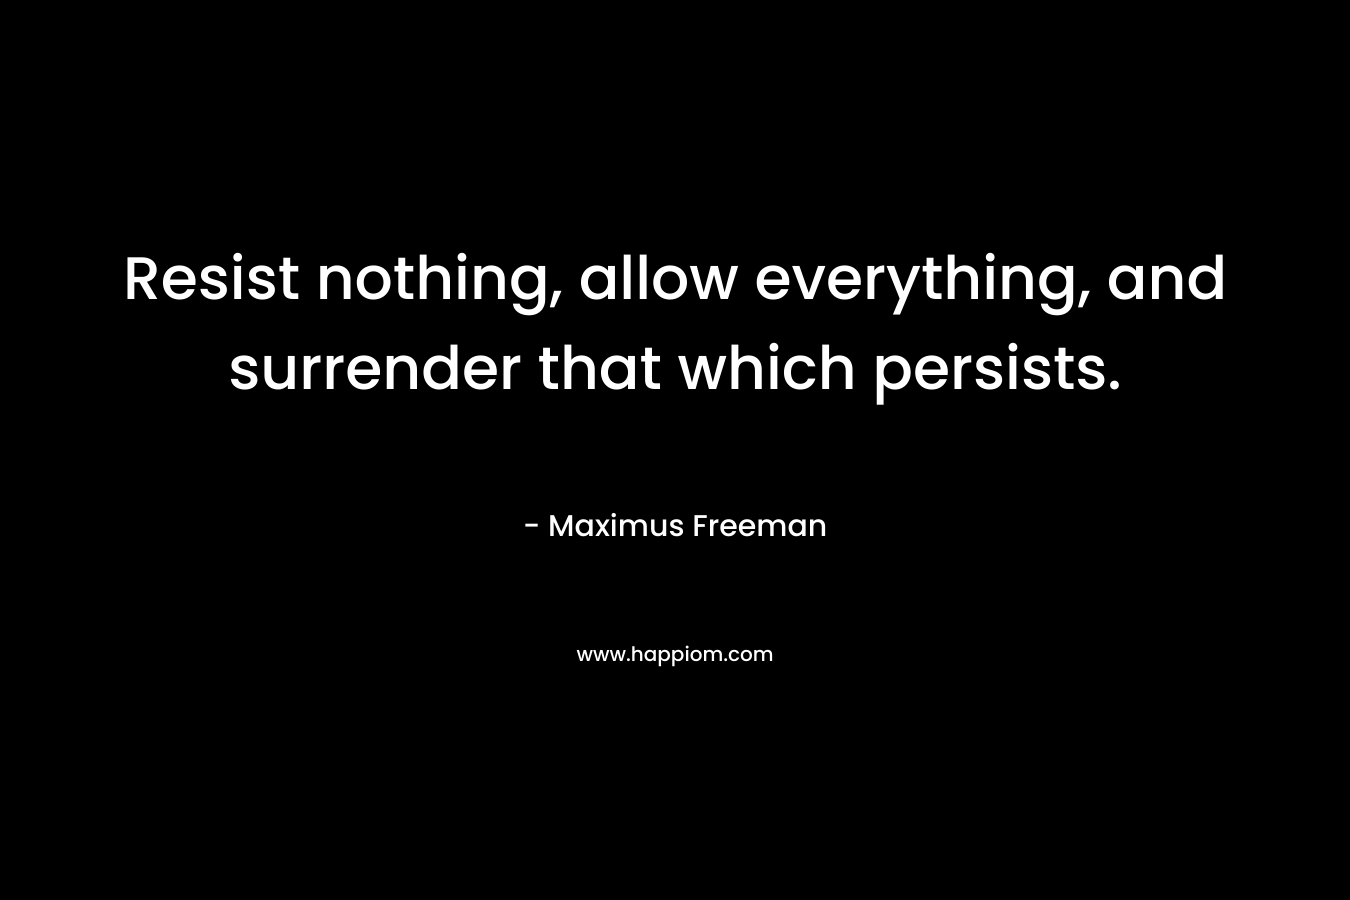 Resist nothing, allow everything, and surrender that which persists.